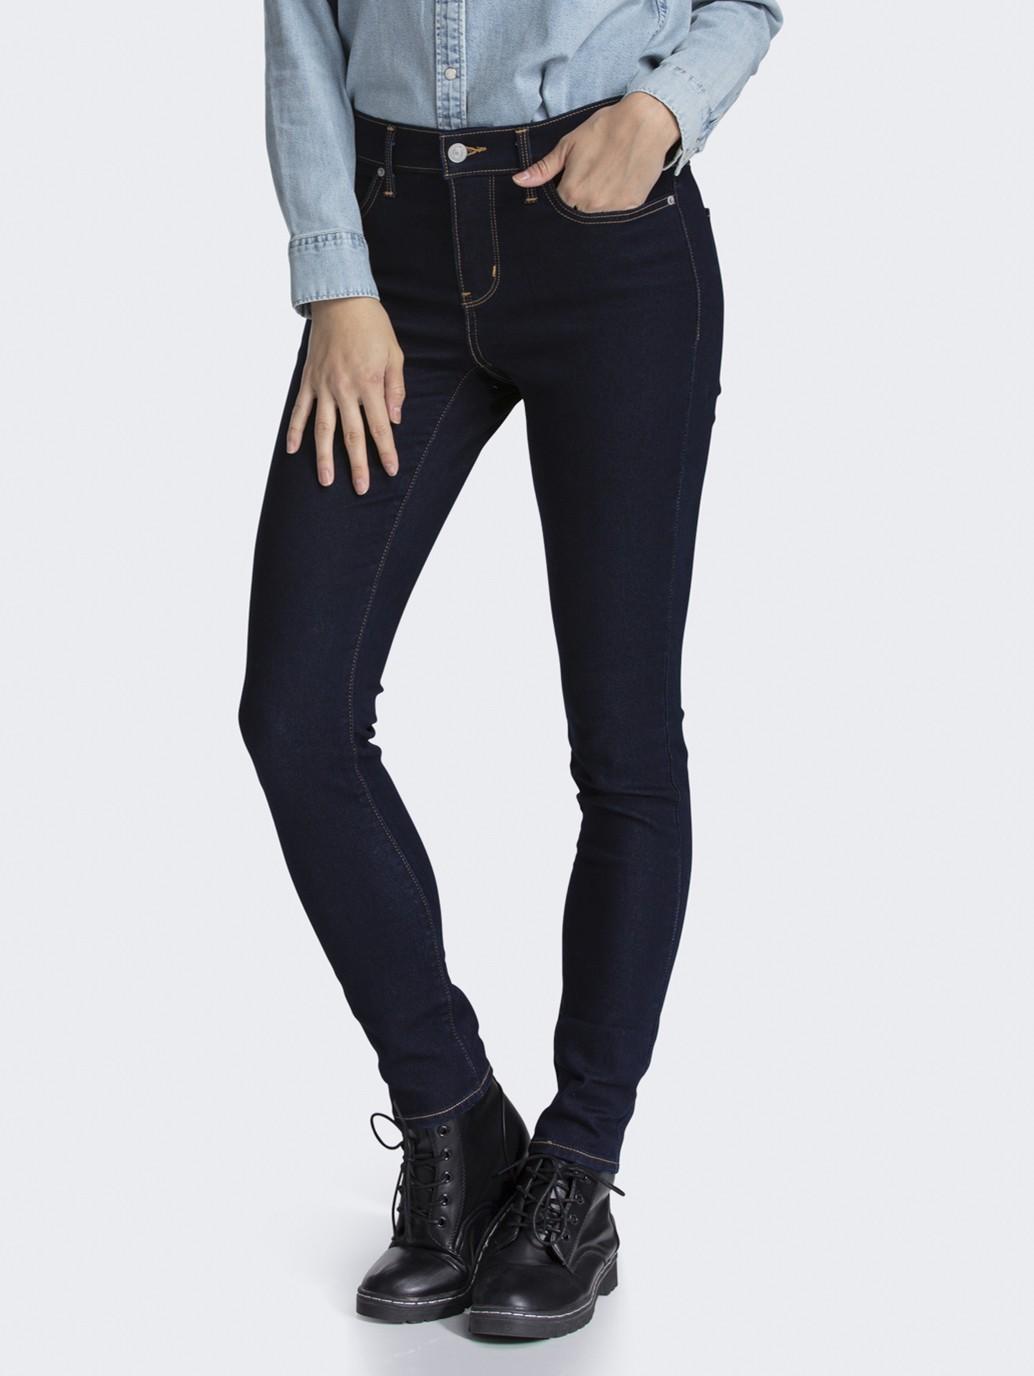 Buy 311 Shaping Skinny Jeans Levi S Official Online Store Sg